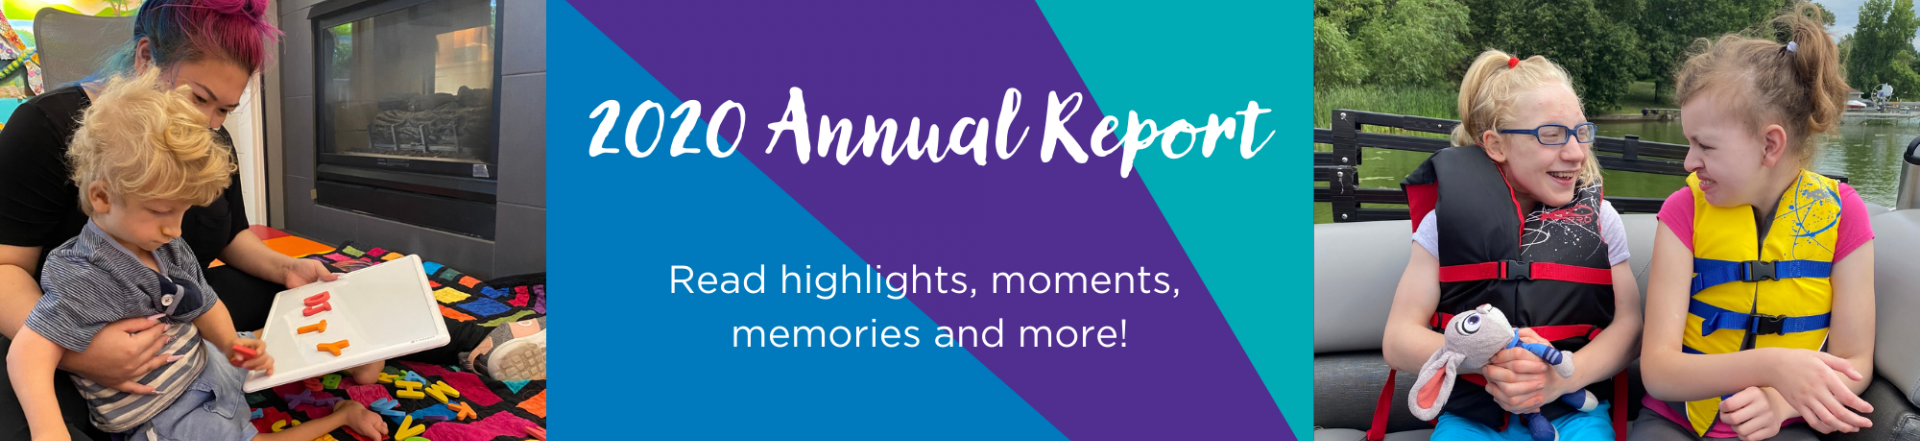 2020-annual-report-slider.png